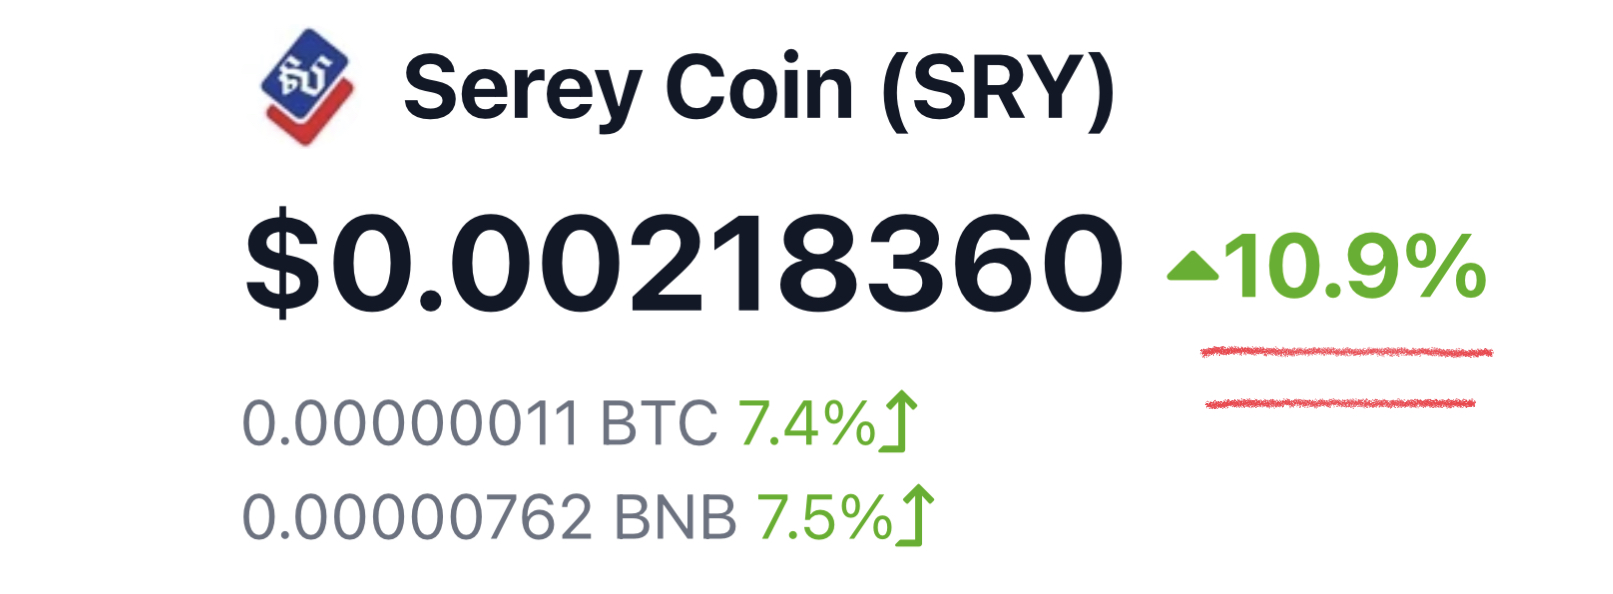 serey-coin-looking-very-strong-up-85-in-one-week-blurt